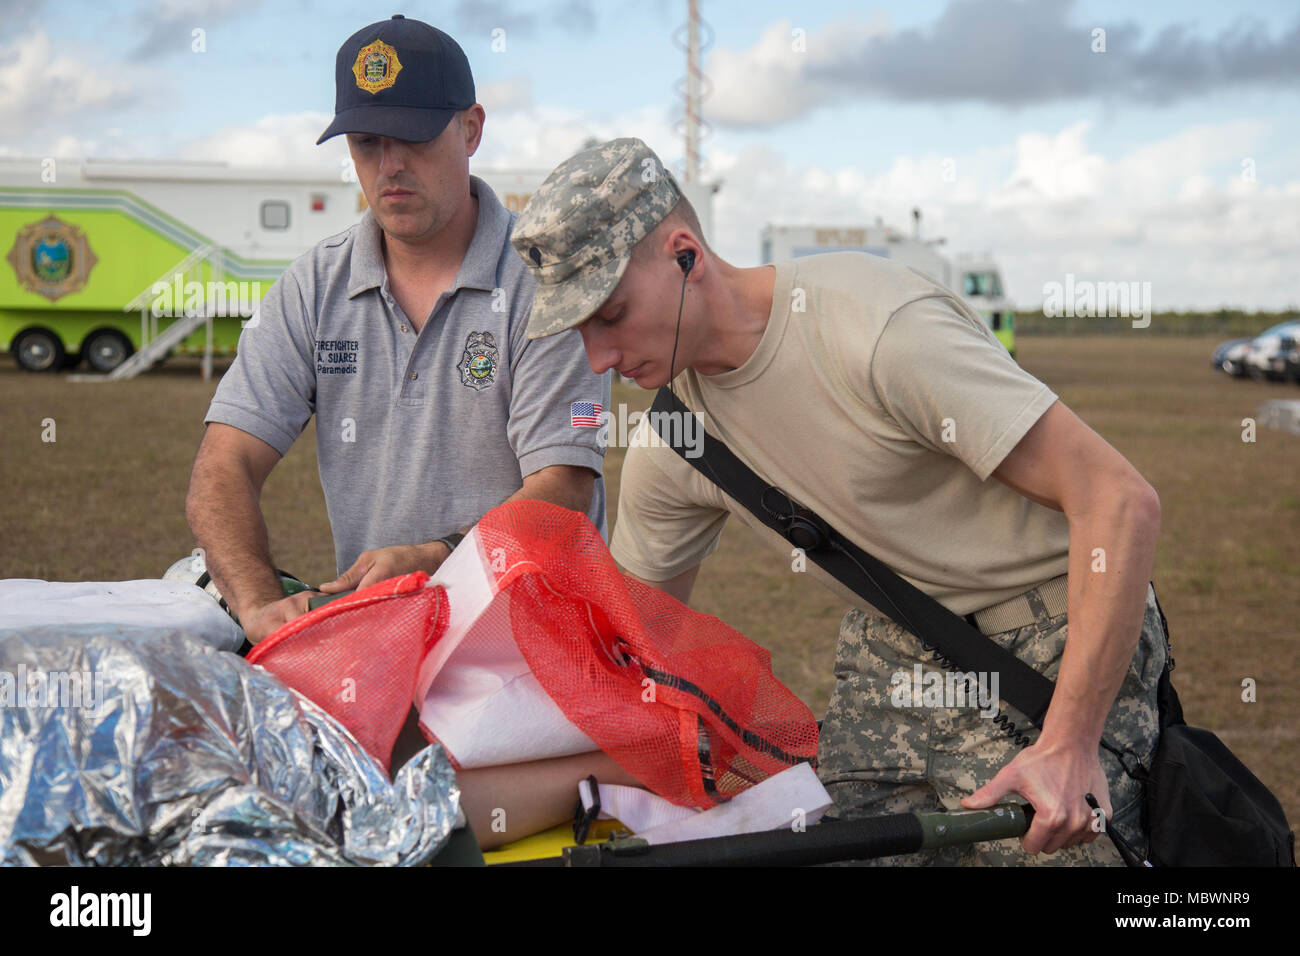 U.S. Army reserve soldier and Miami-Dade Fire Department Hazmat member, secures a casualty to a gurny for a simulated mass chemical attack during a Joint Training Exercise hosted by the Miami-Dade Fire Department and Homestead-Miami Speedway in Miami, Fla. Jan. 11, 2018. This JTE focused on building response capabilities and seamless the transition between the local first responders and the follow-on support provided by the National Guard and Active duty soldiers. (U. S. Army Photo by Spc. P.J. Siquig) Stock Photo